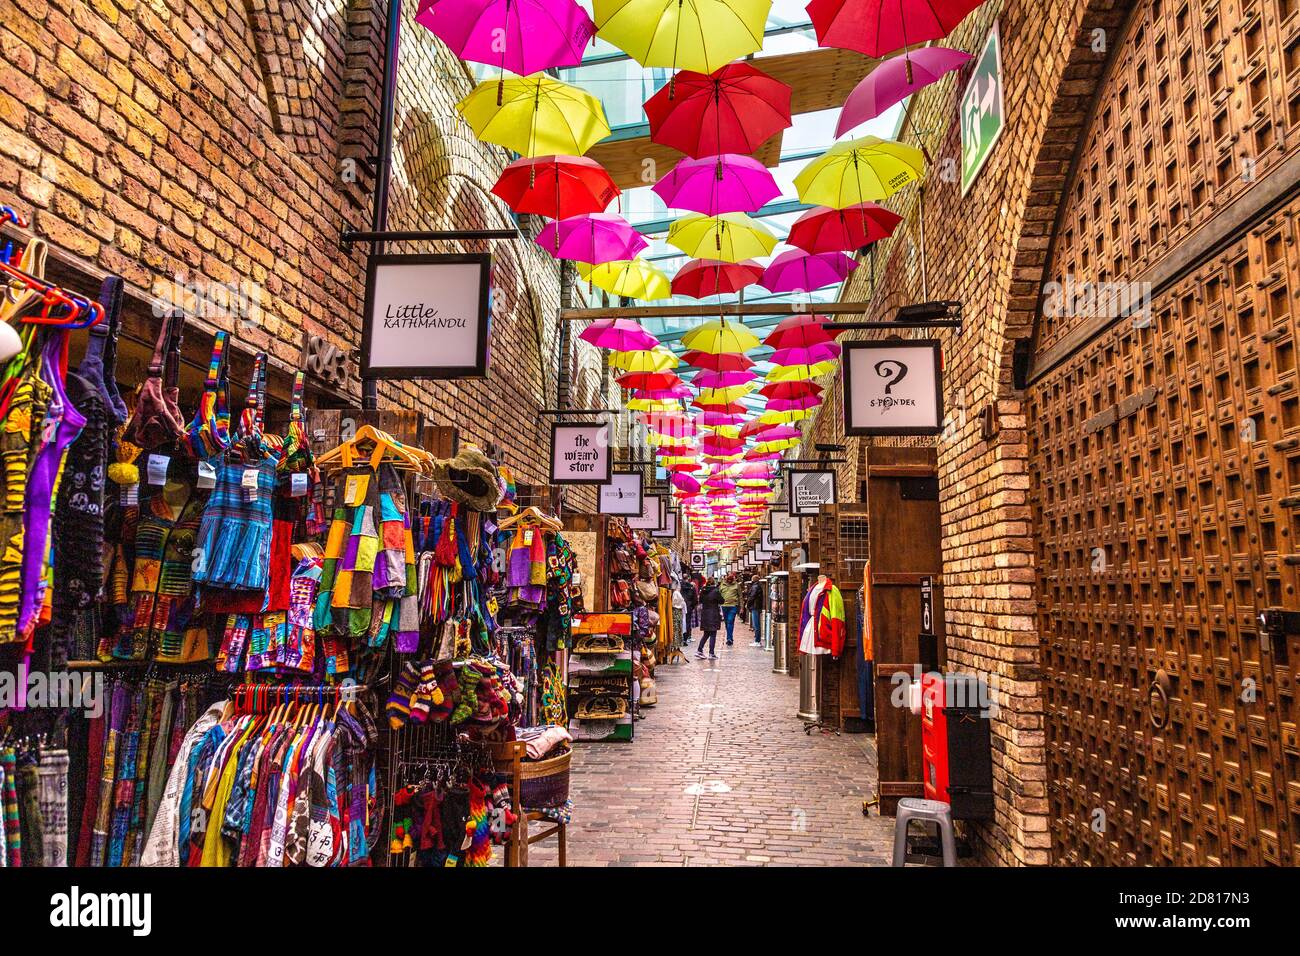 Alley covered with umbrellas at Camden Market, London, UK Stock Photo